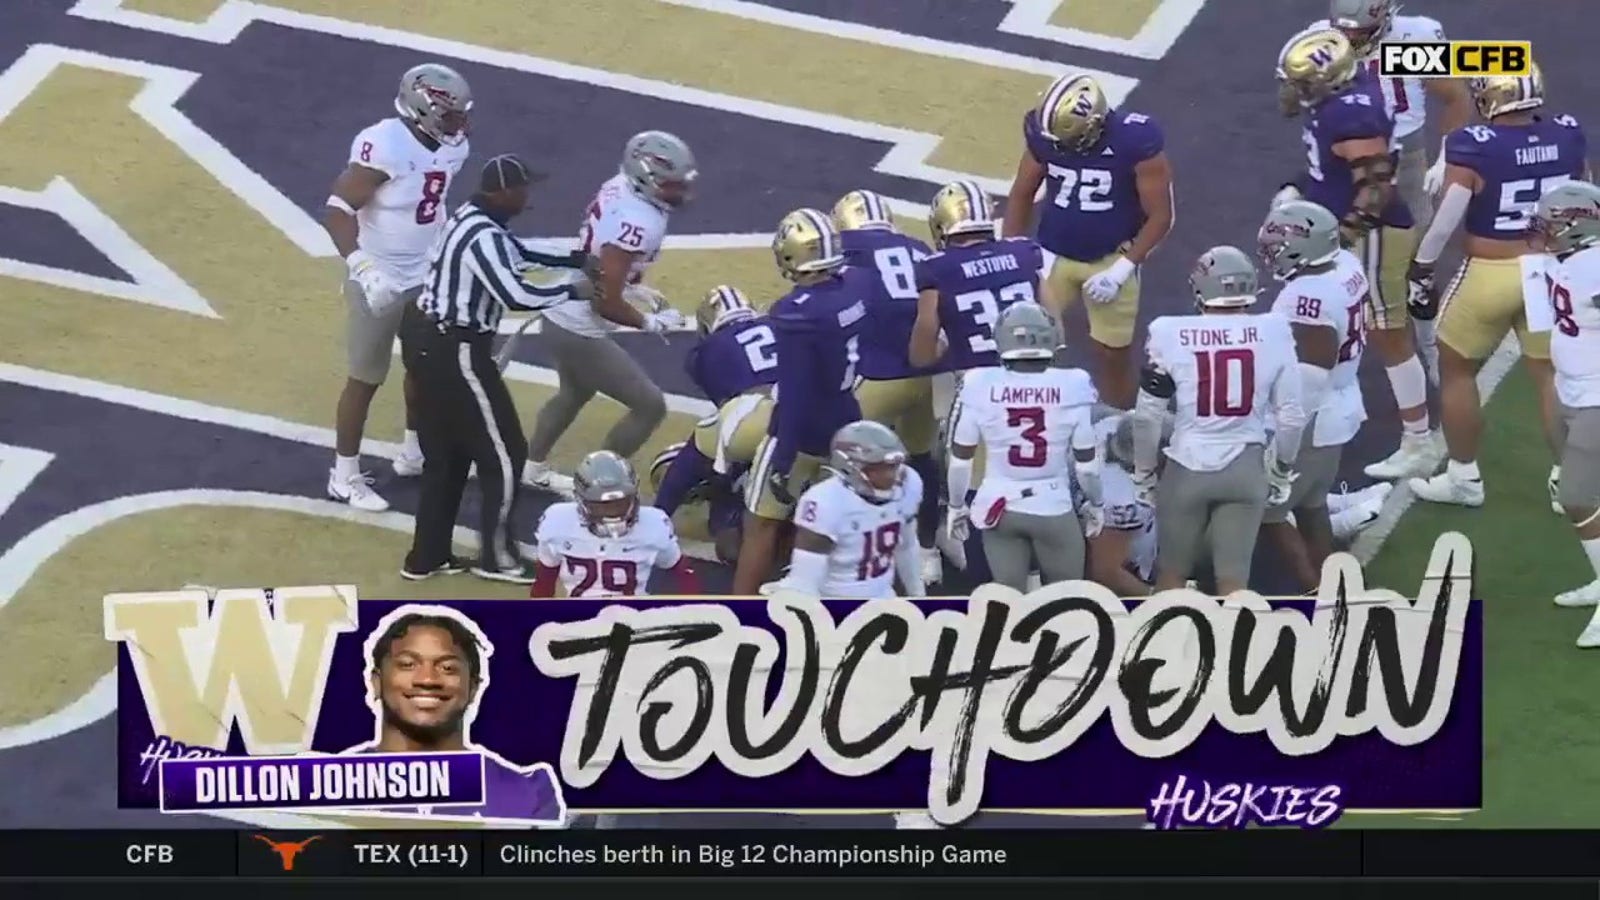 Dillon Johnson punches in a one-yard TD to give Washington the lead